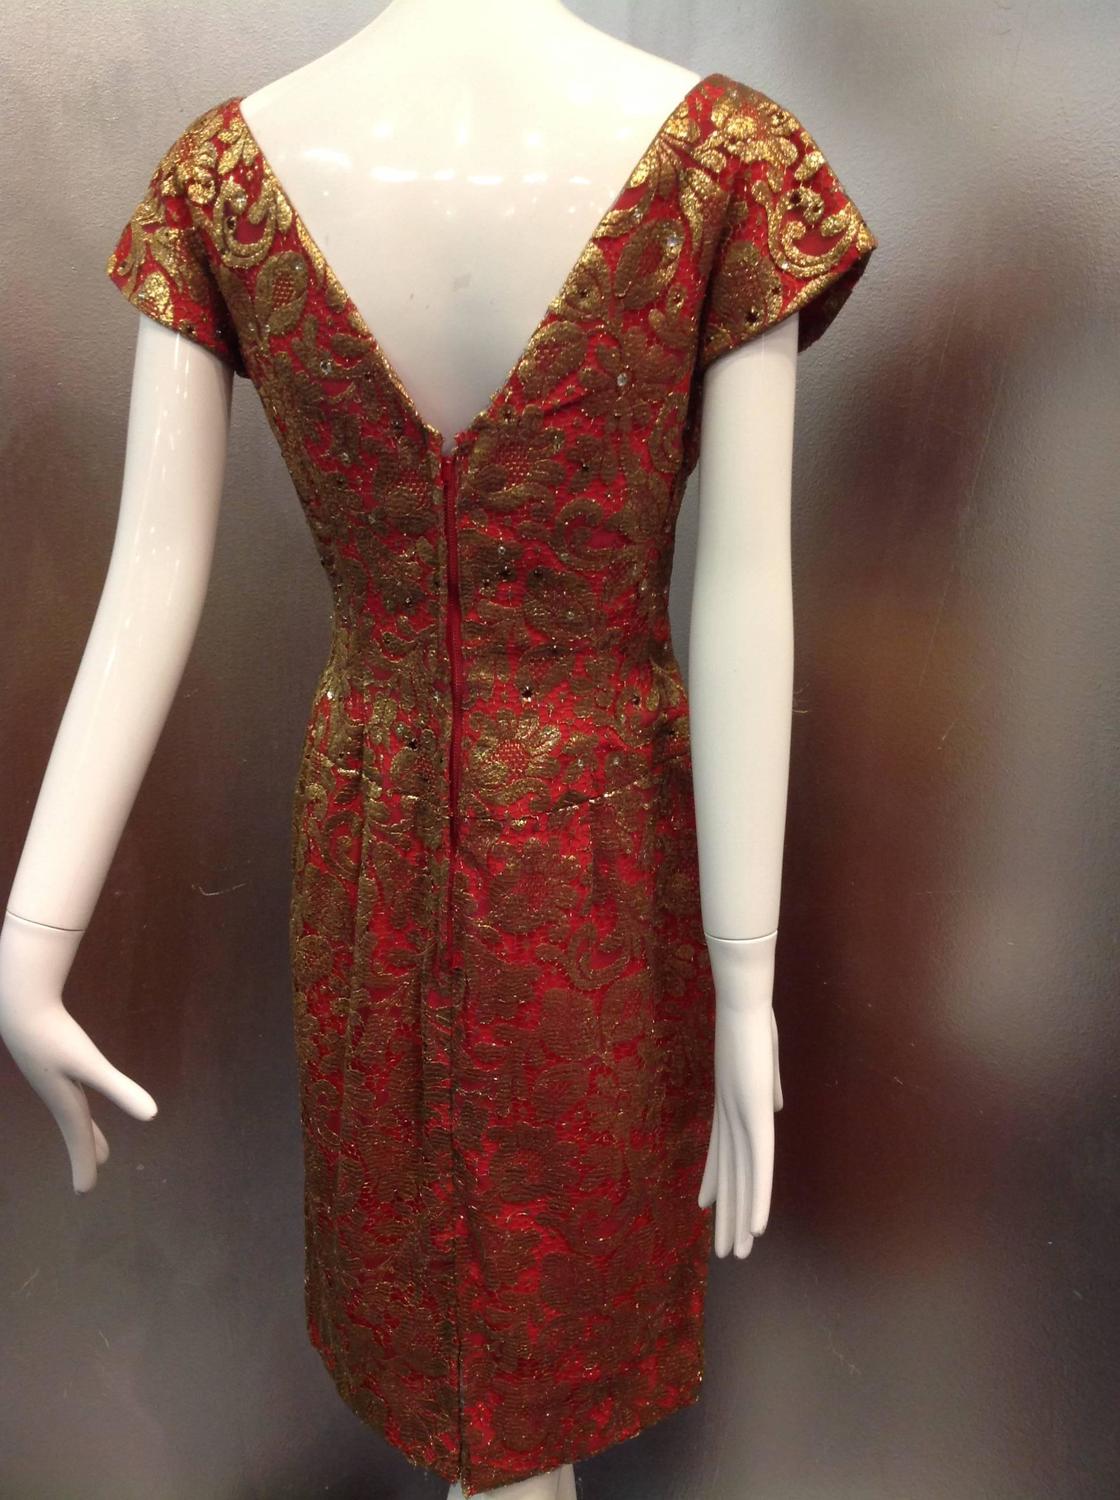 1950s Red Sheath Dress with Beautiful Gold Lame Lace Overlay and ...